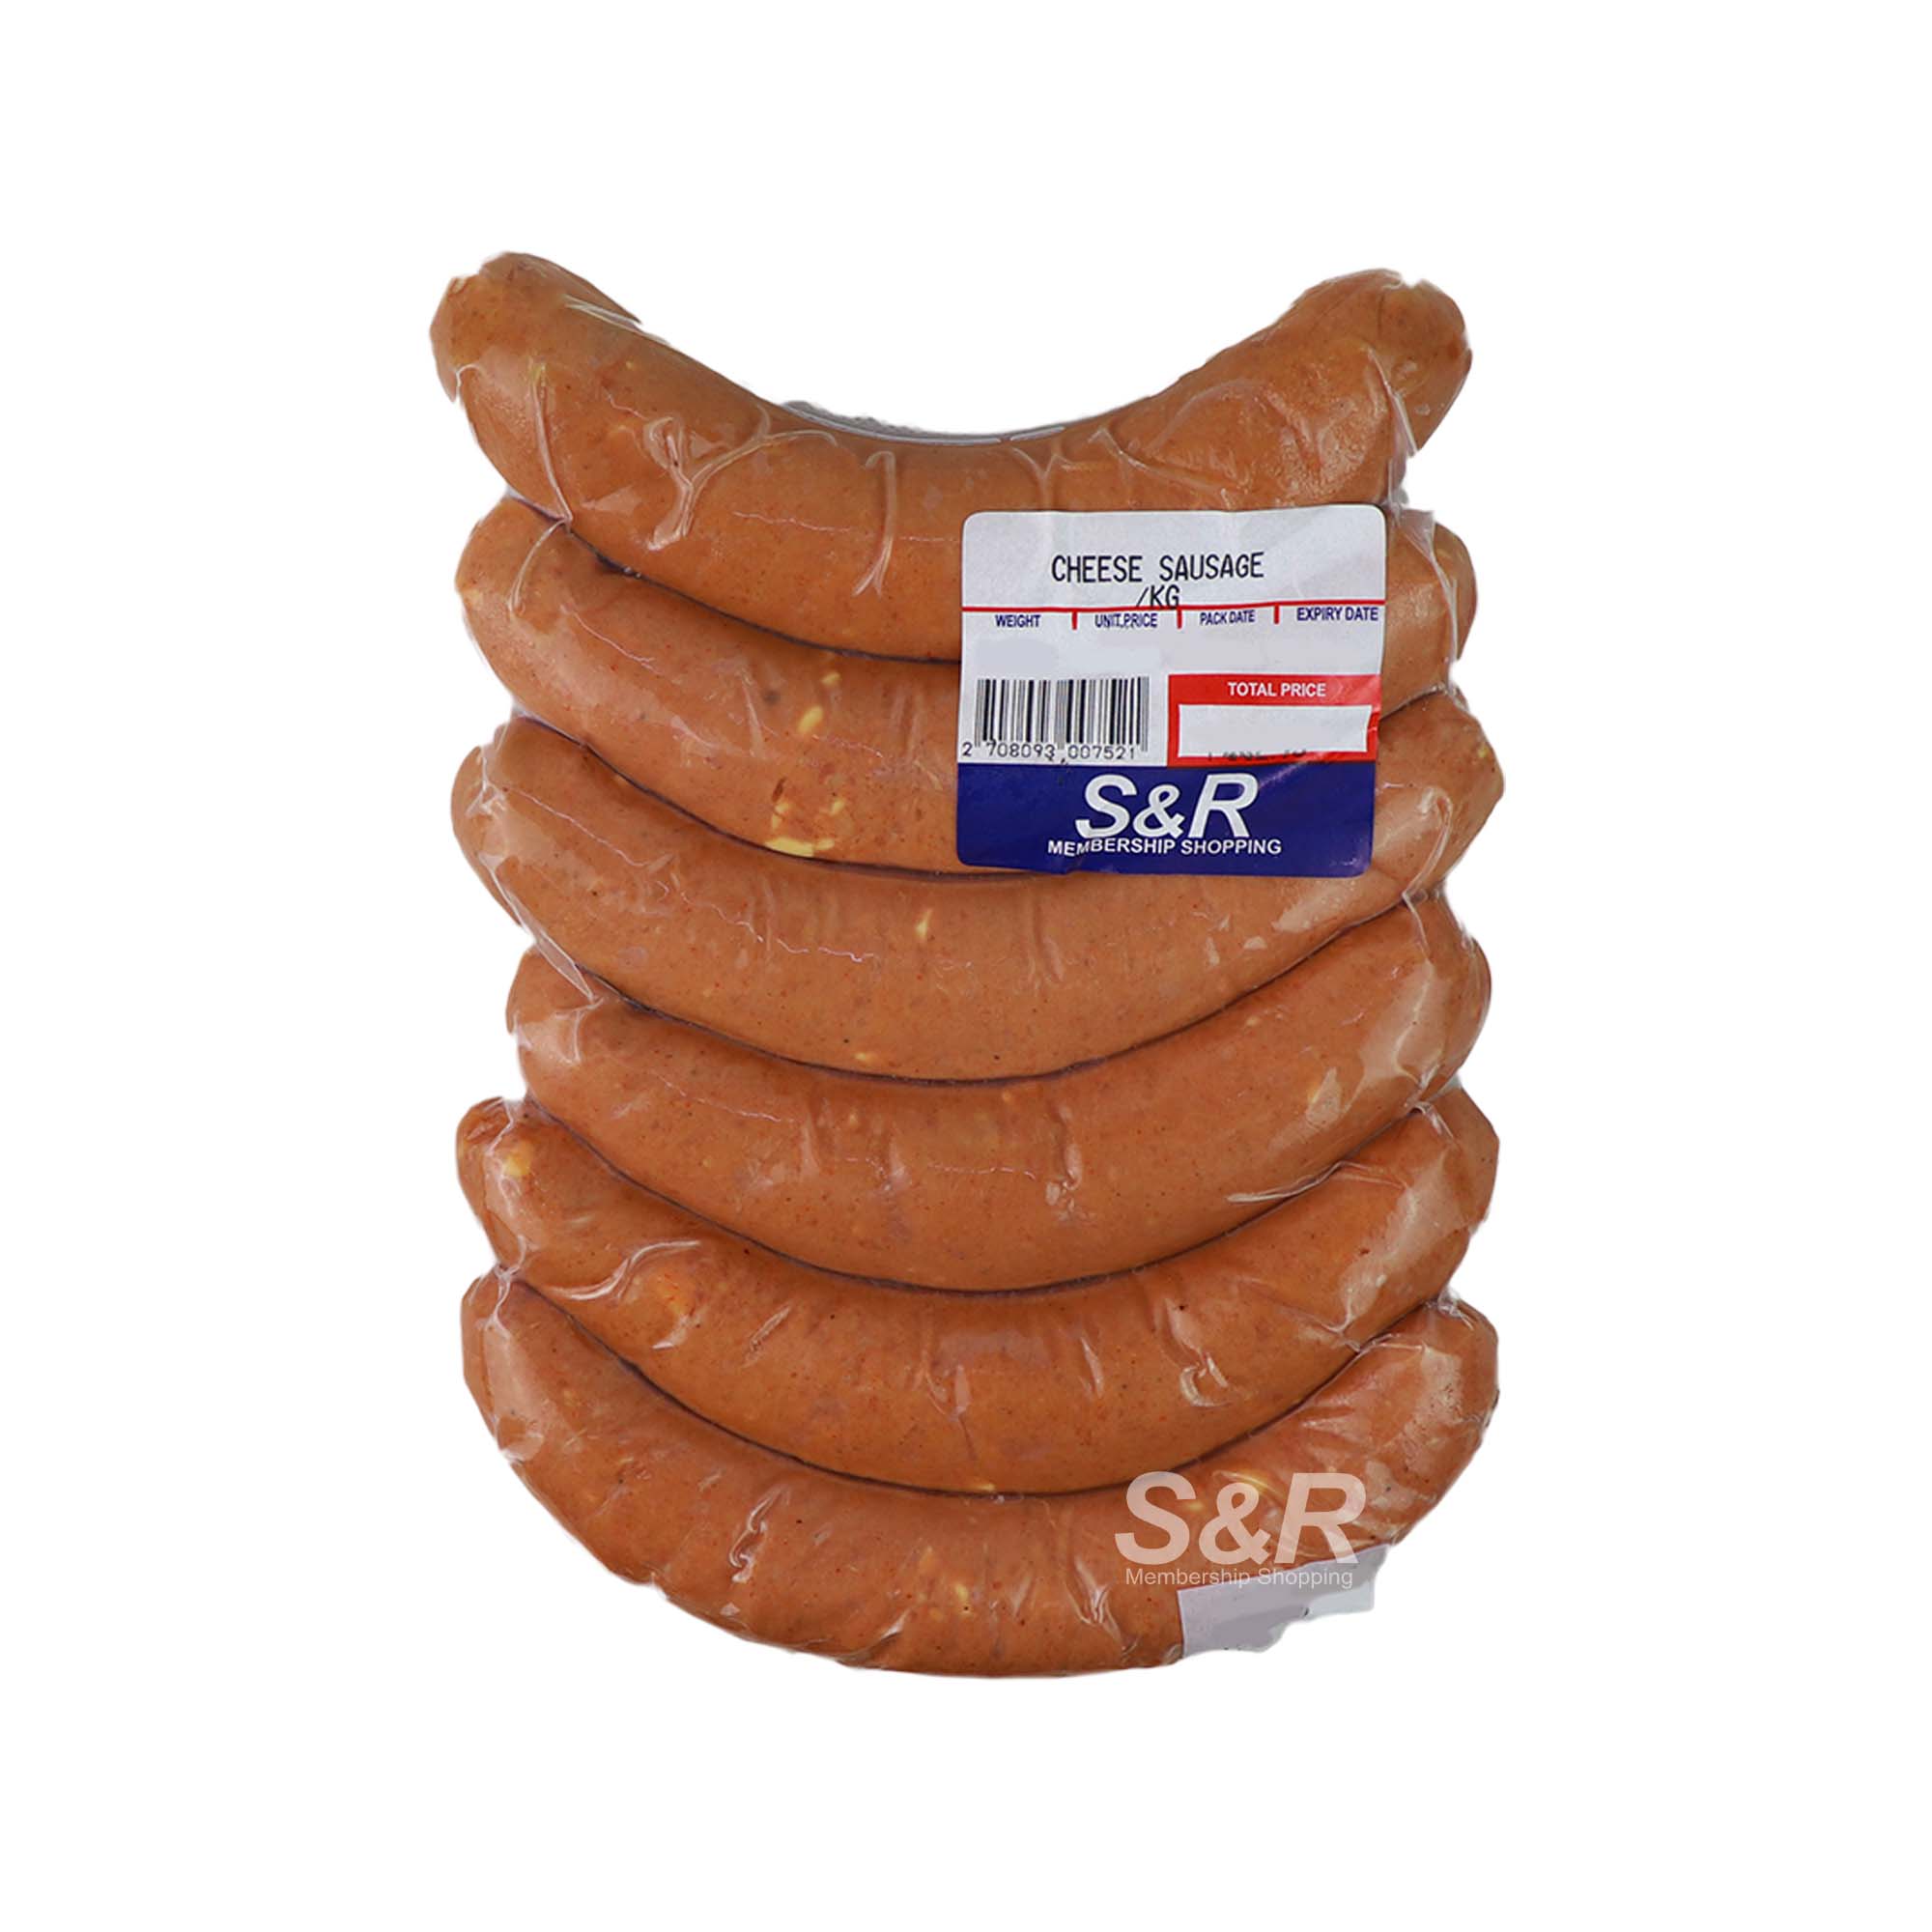 S&R Cheese Sausage approx. 1kg